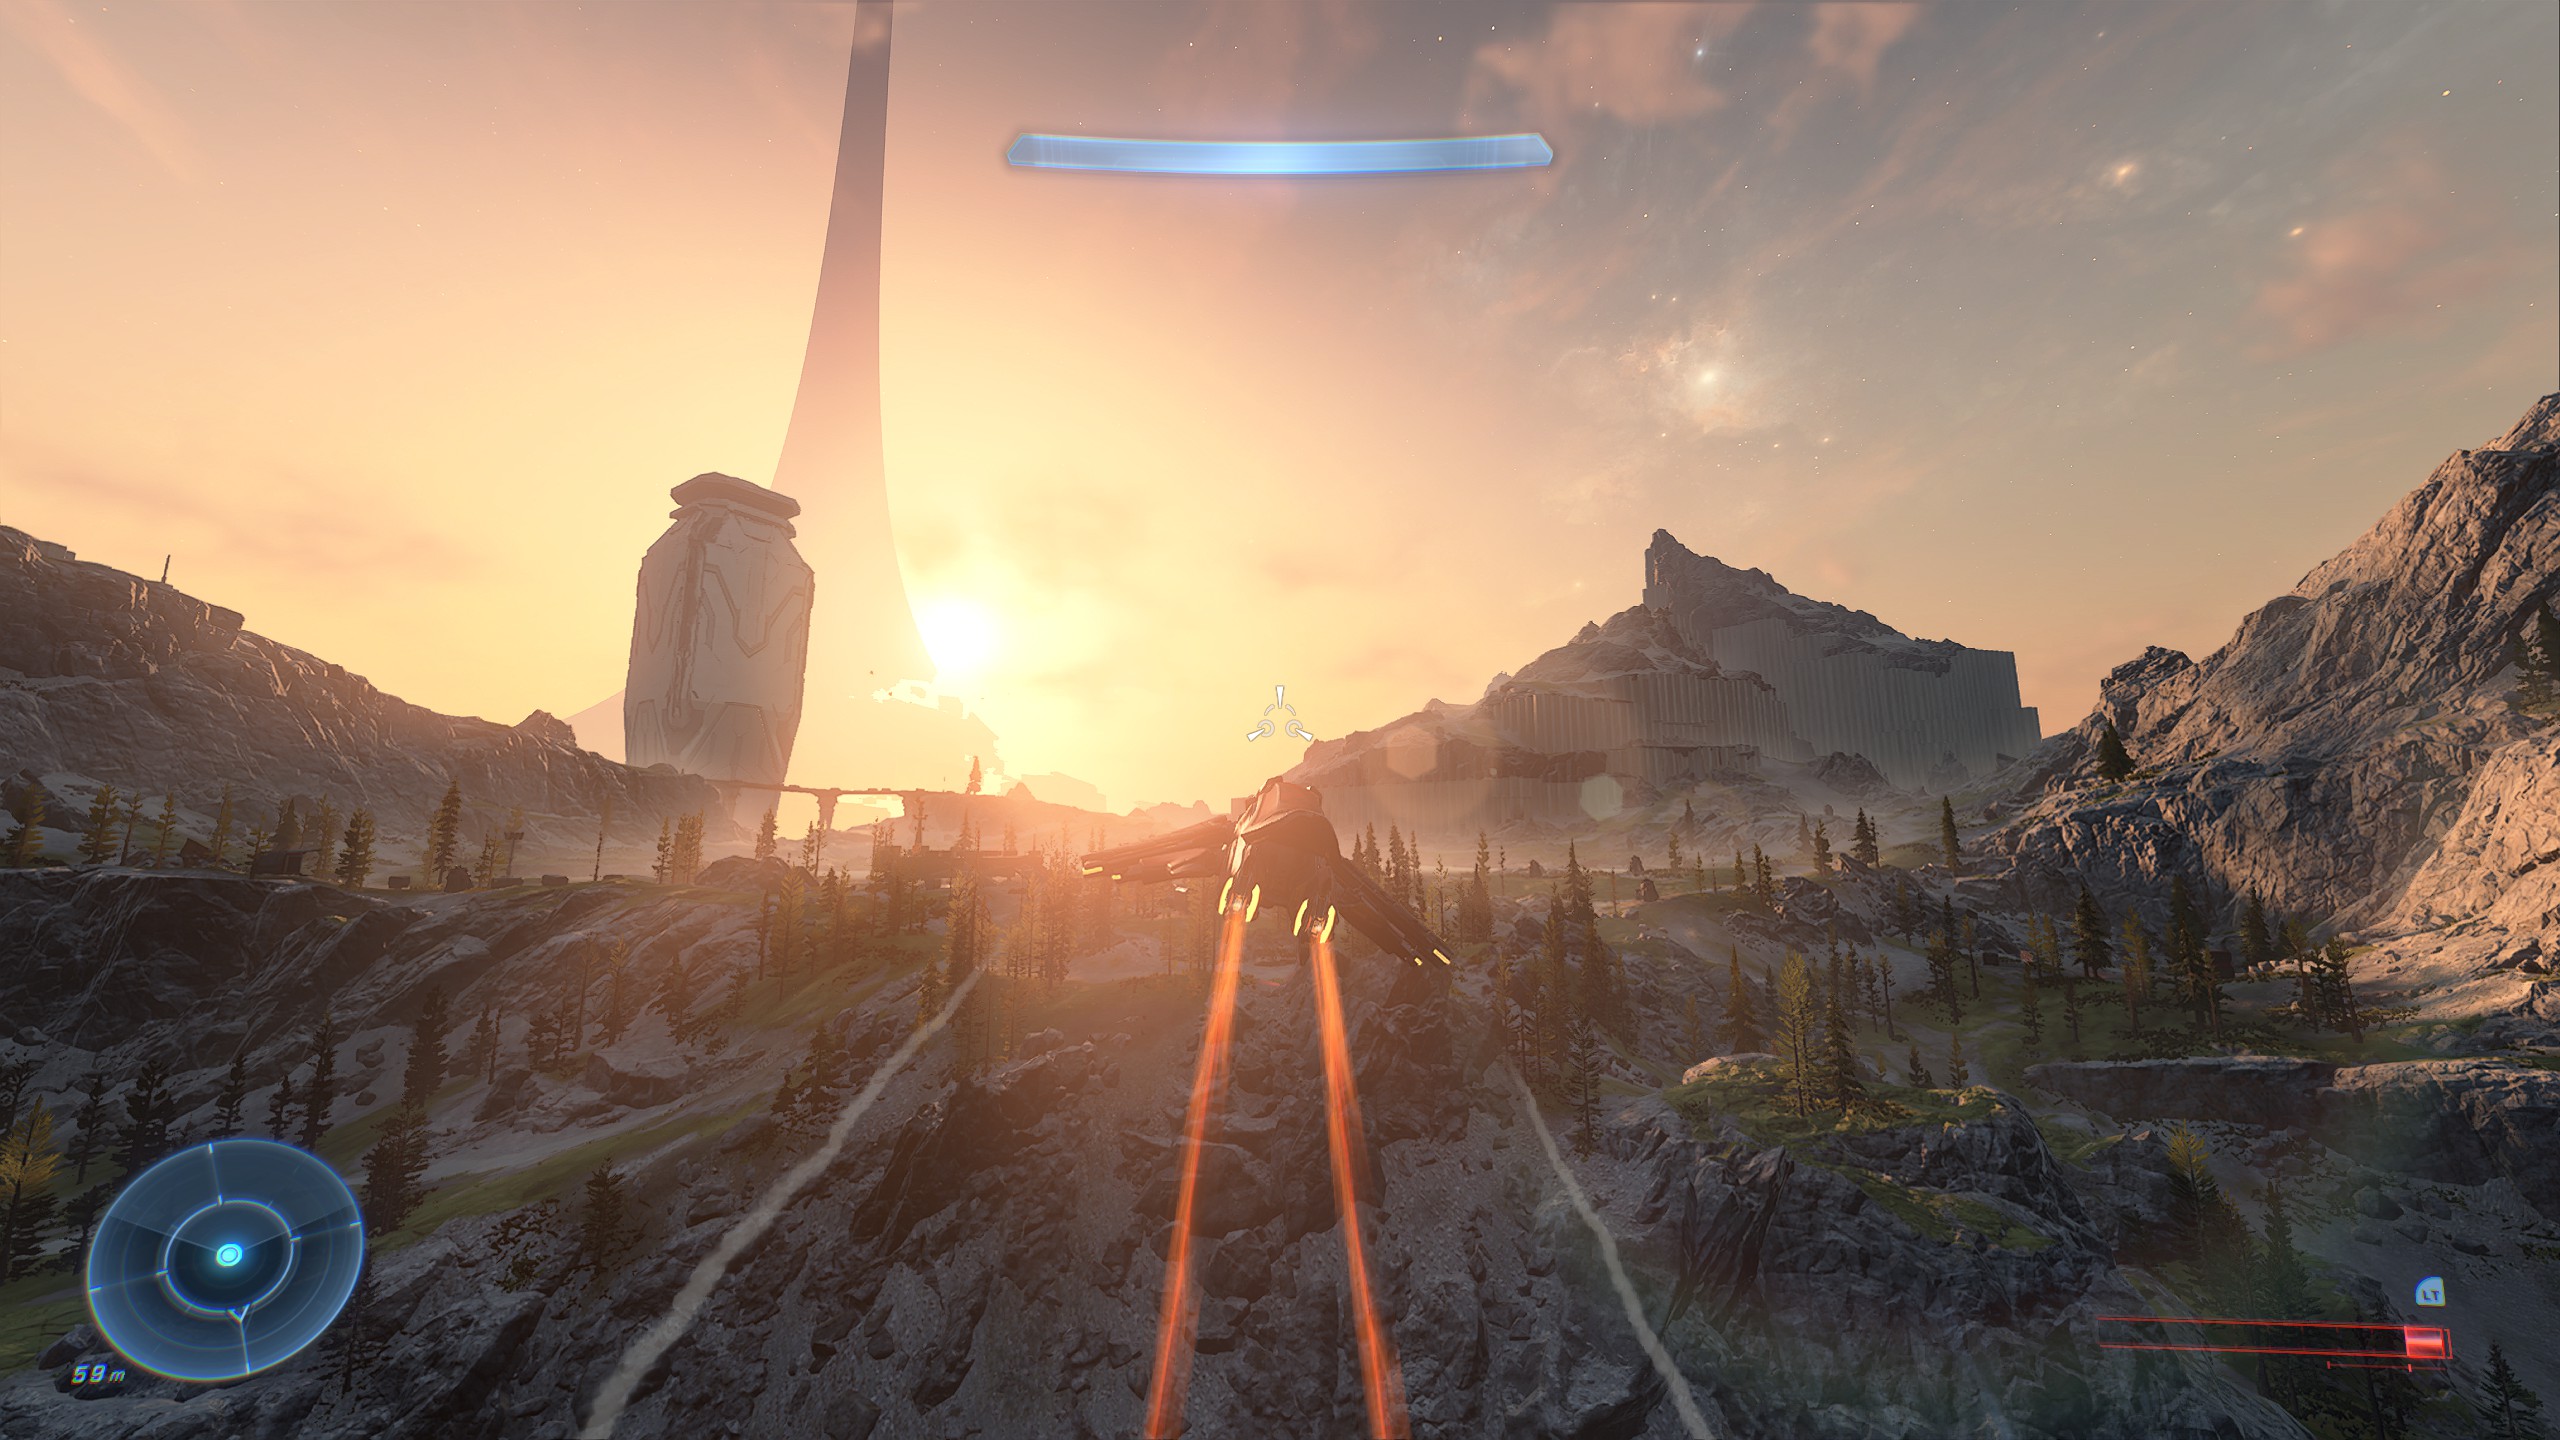 The sun sets over halo